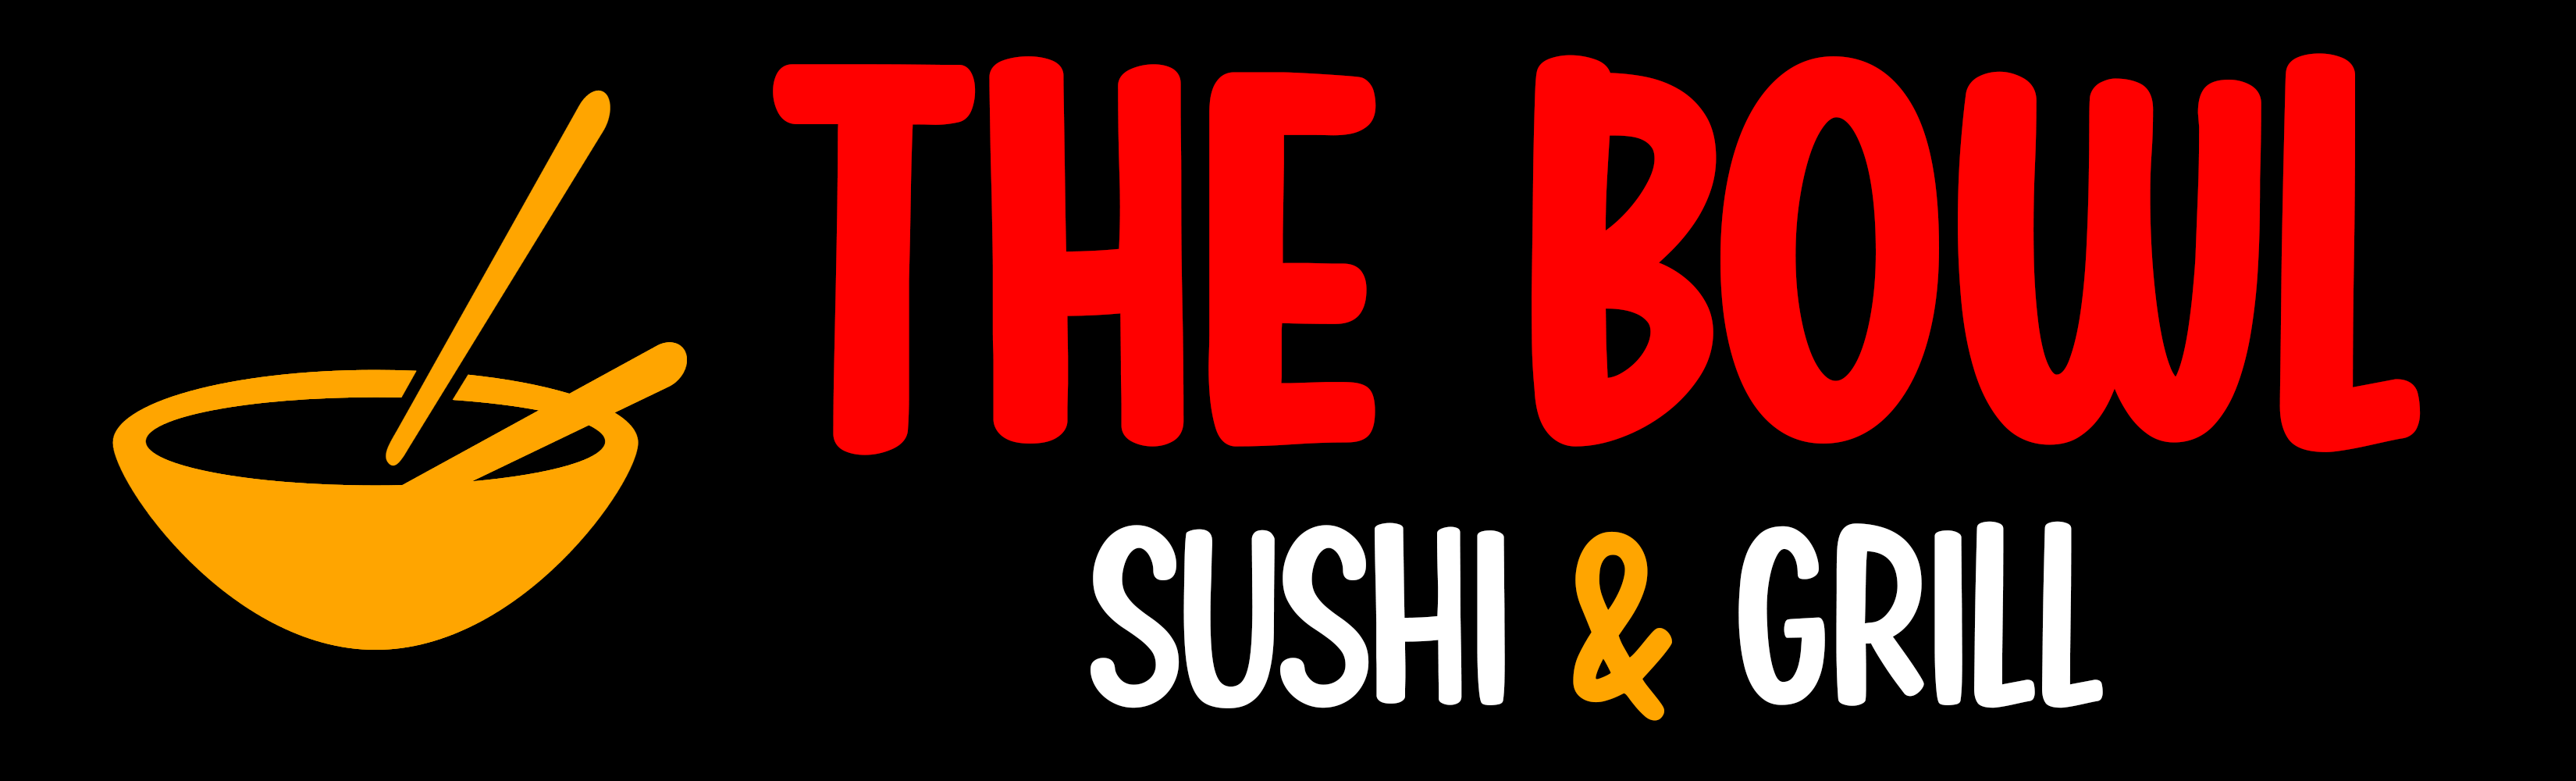 The Bowl Sushi & Grill